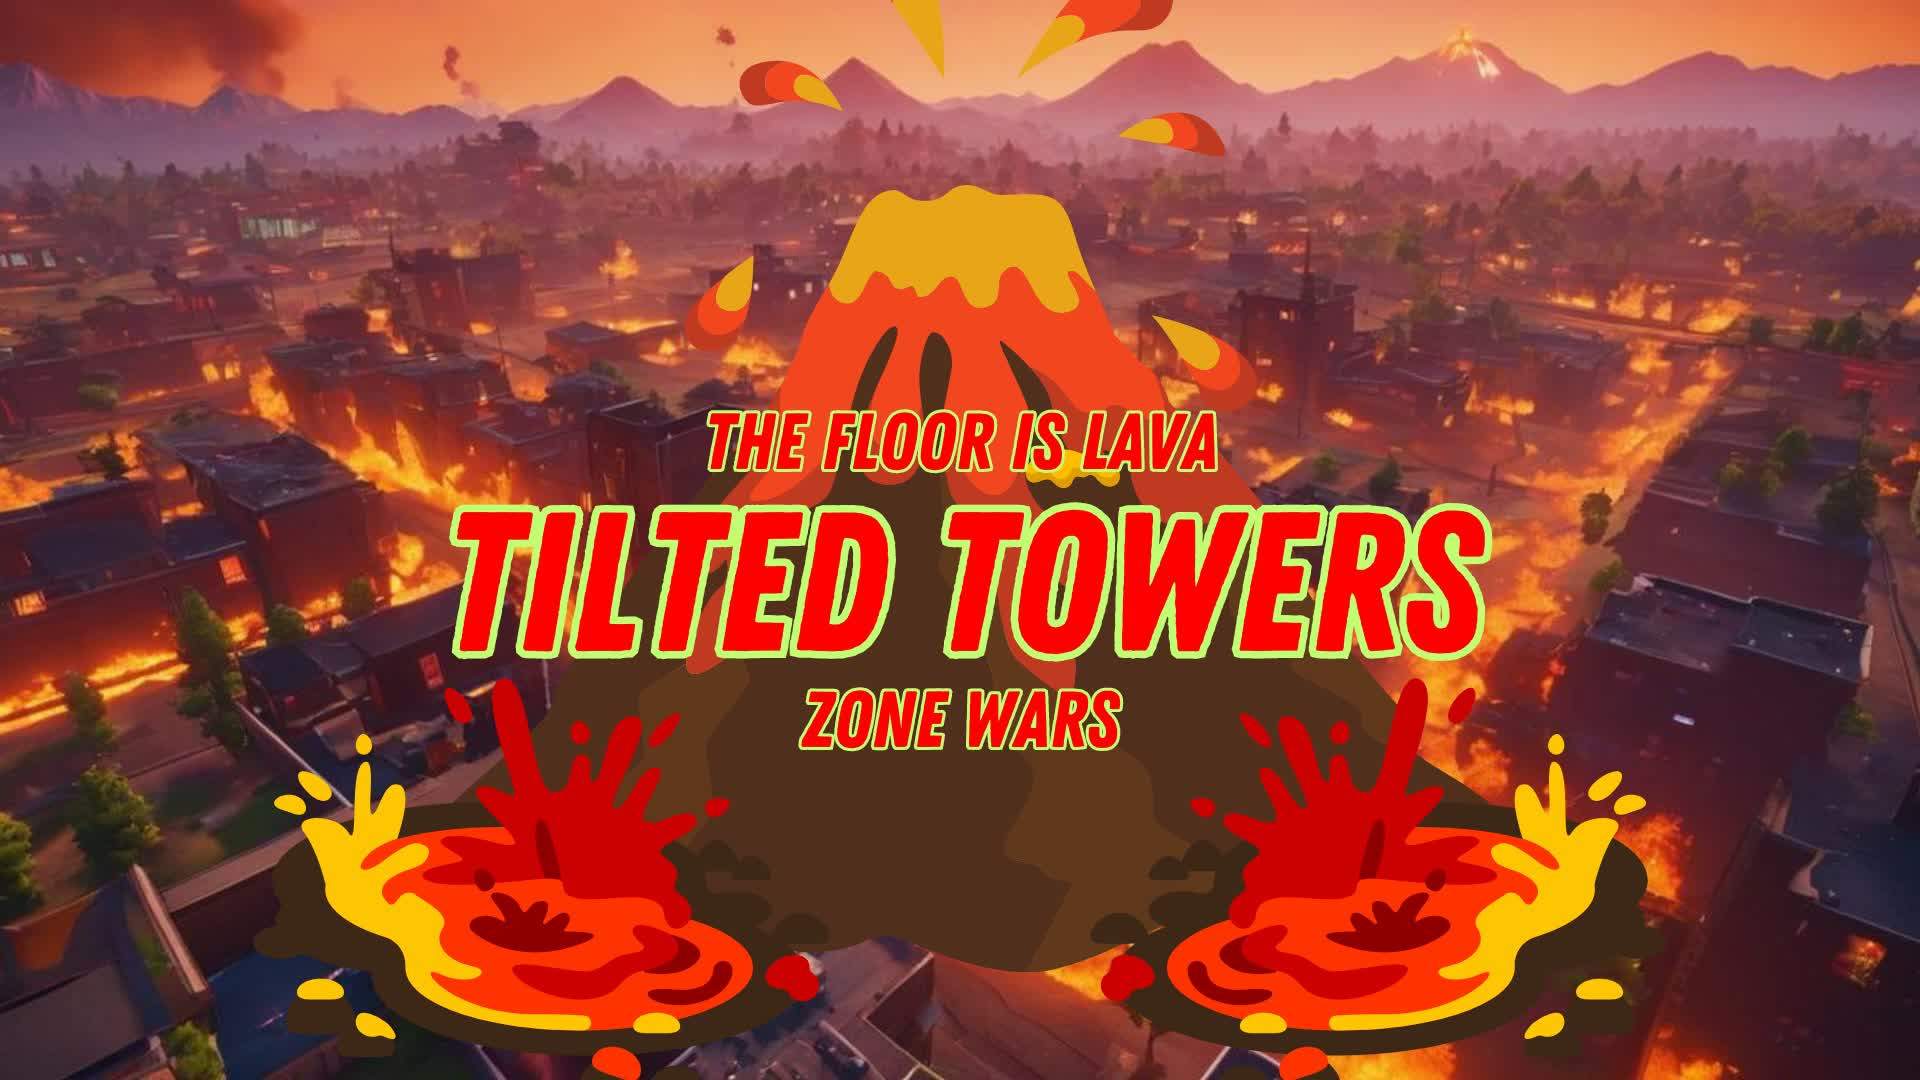 THE FLOOR IS LAVA: TILTED TOWERS